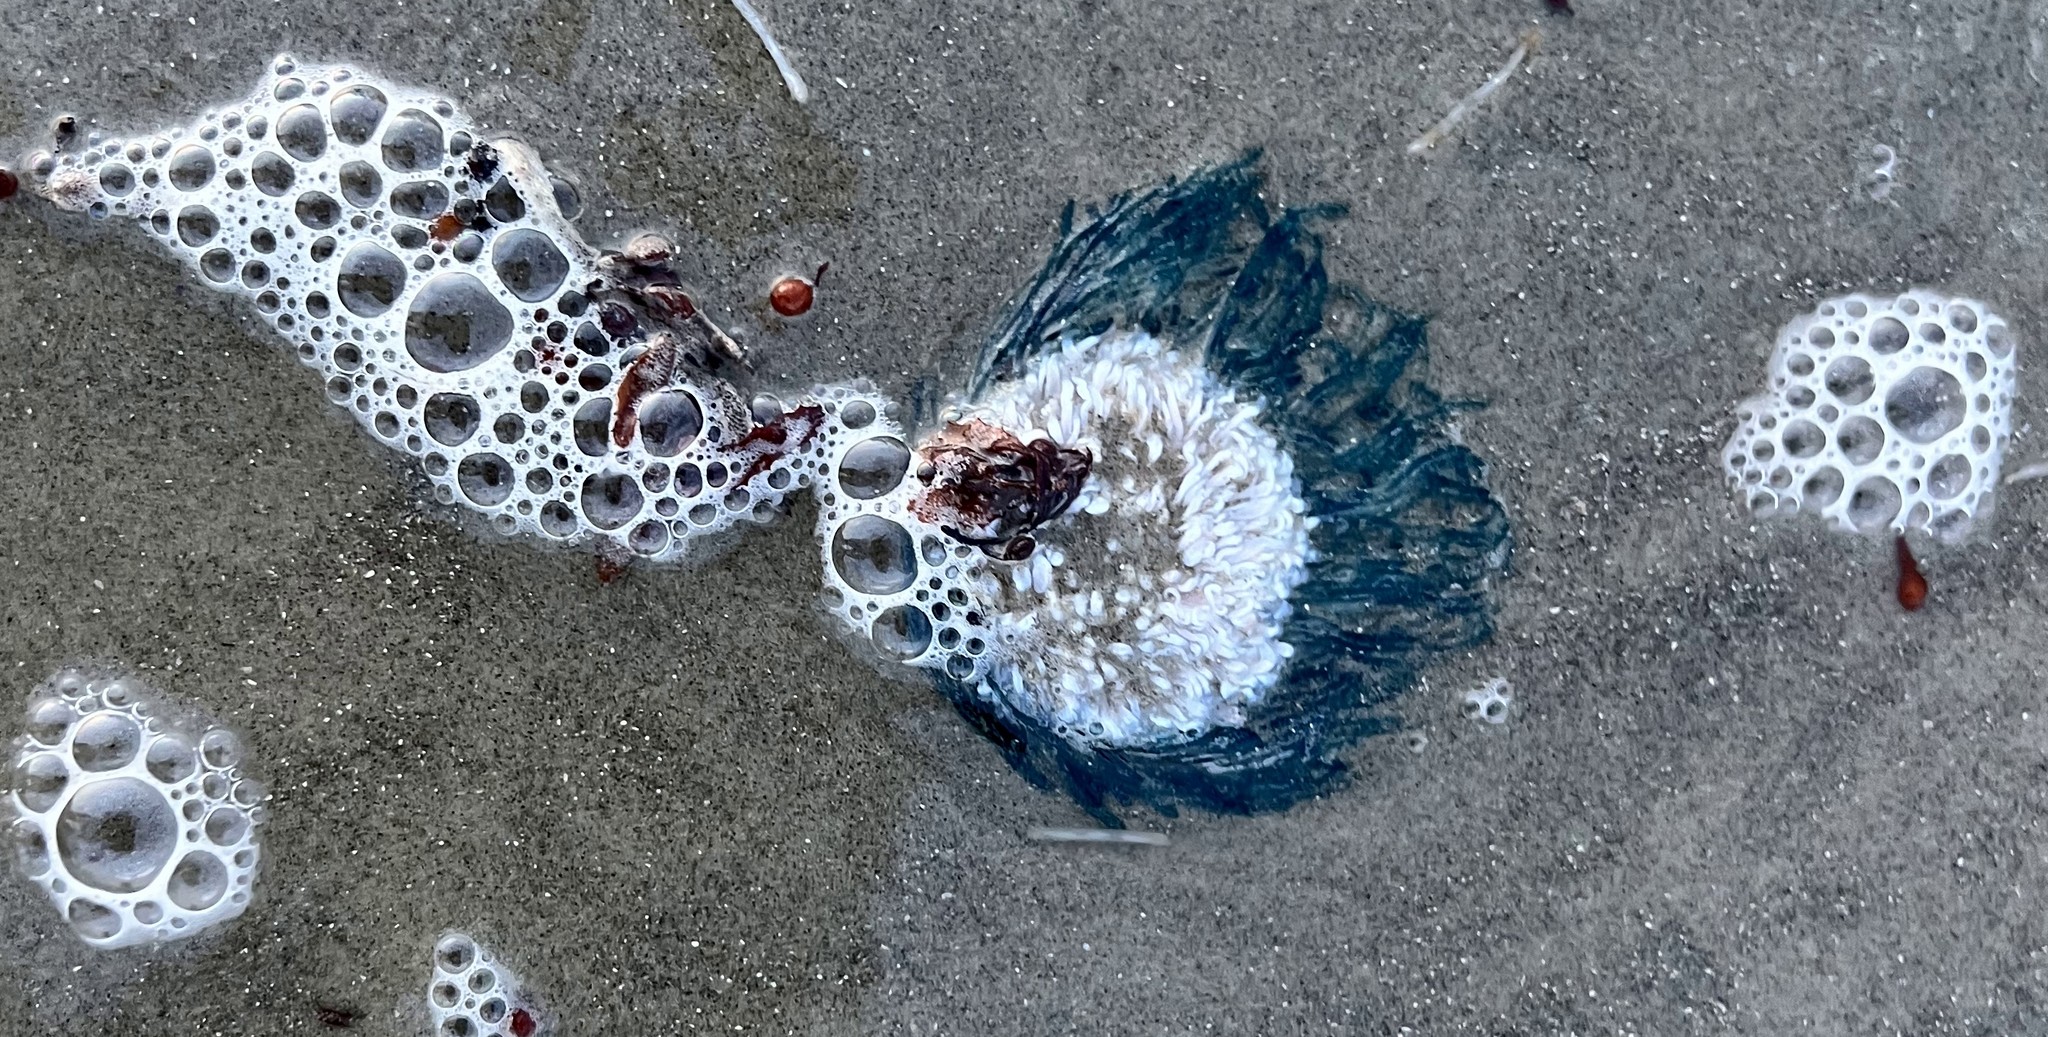 Beware of sting from tiny blue creatures washing up in Texas